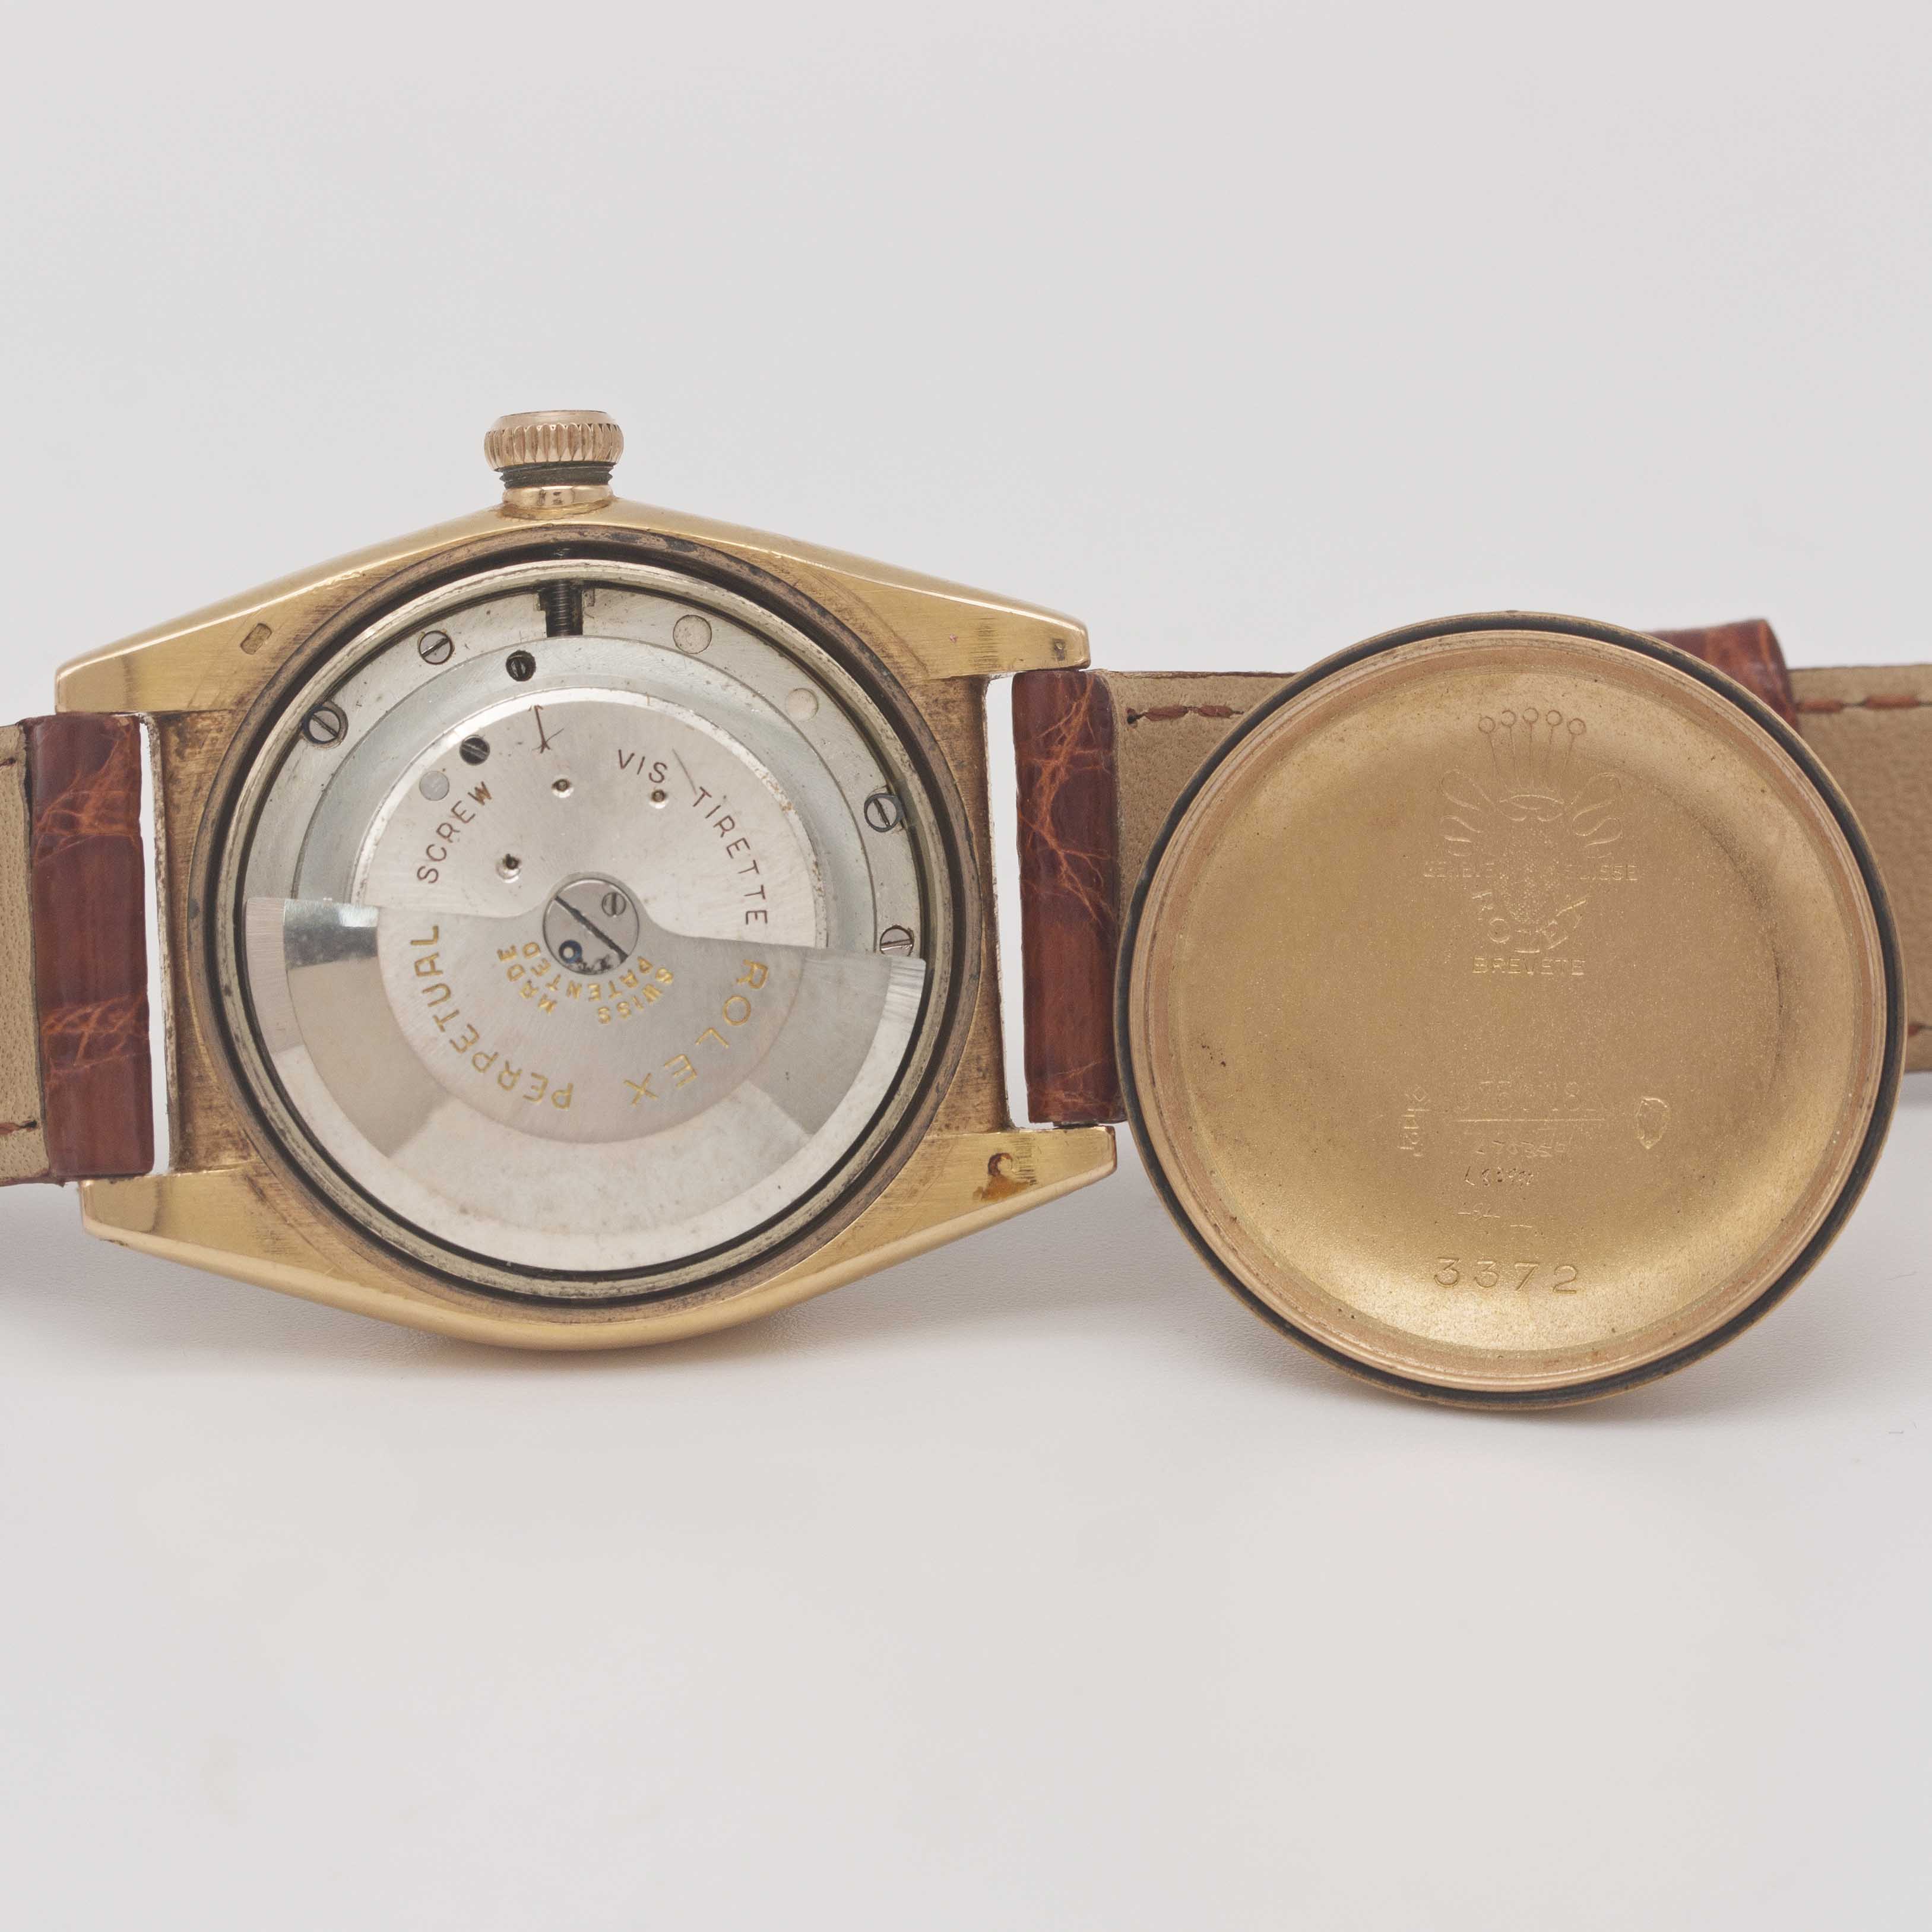 A GENTLEMAN'S 18K SOLID YELLOW GOLD ROLEX OYSTER PERPETUAL CHRONOMETRE "BUBBLE BACK" WRIST WATCH - Image 8 of 10